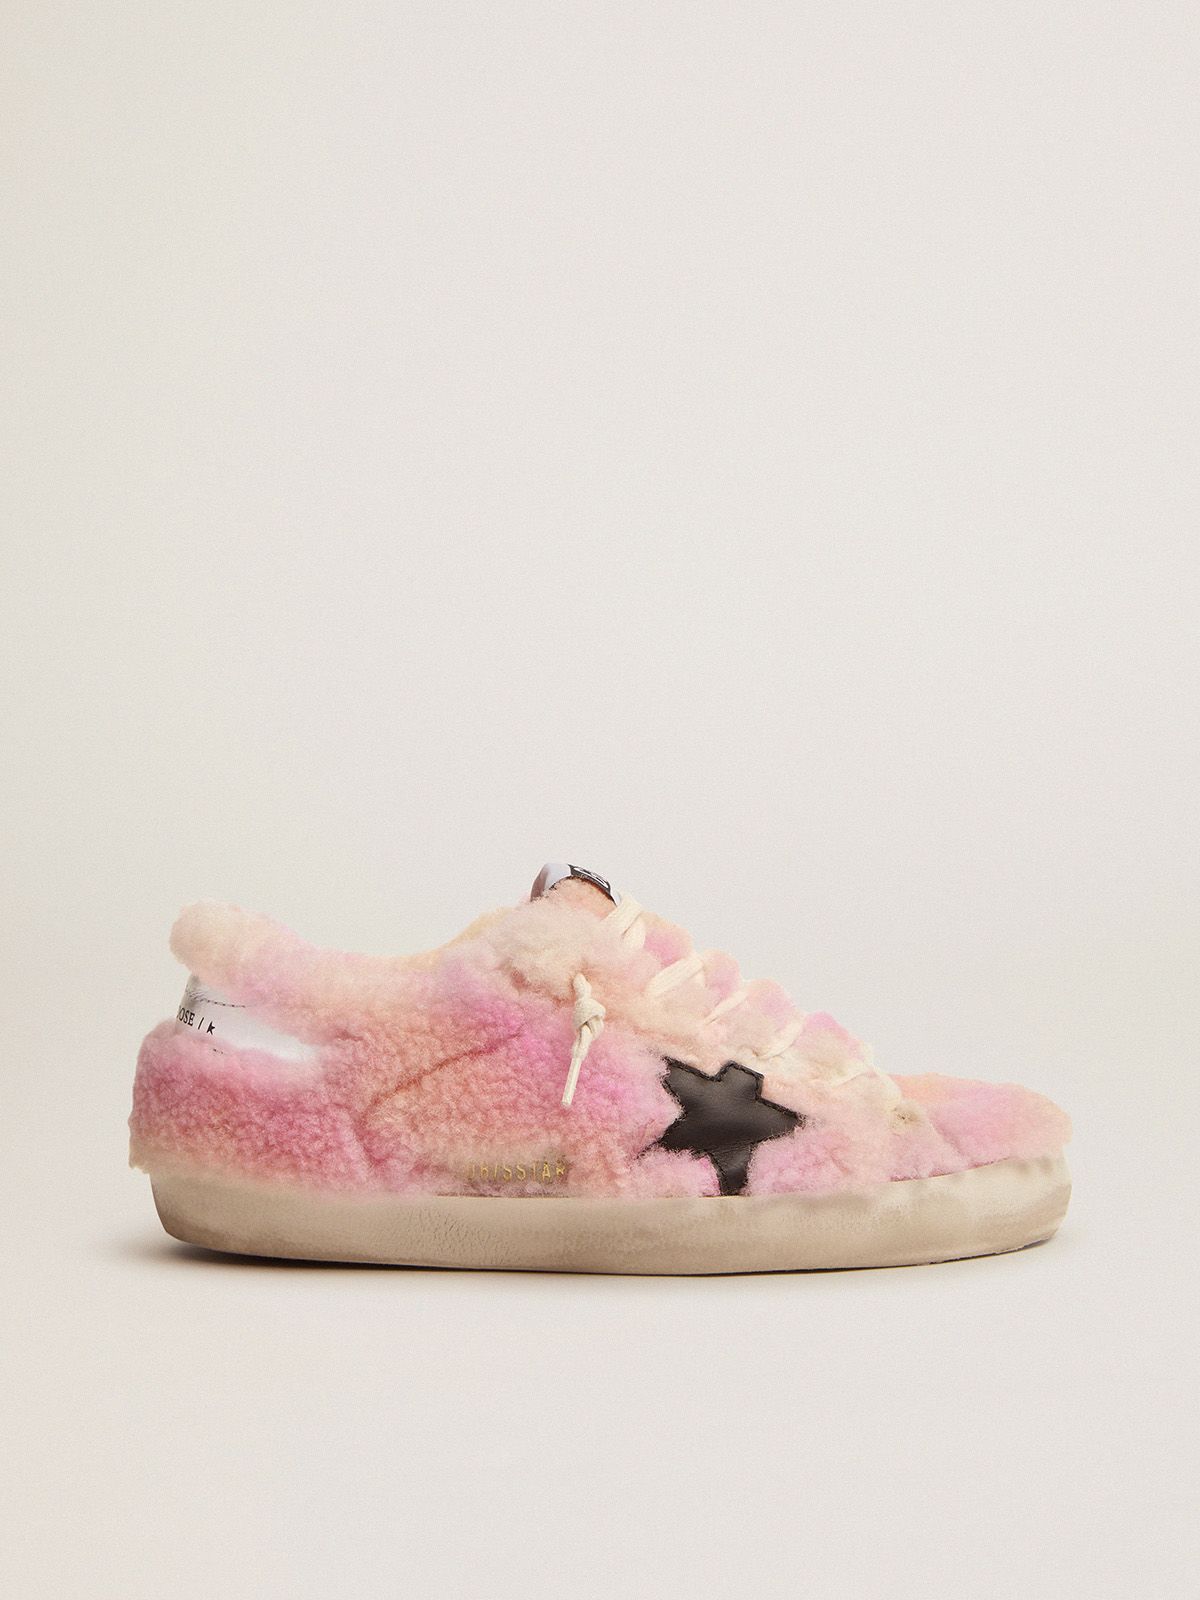 golden goose in and upper with shearling tie-dye pink Super-Star sneakers lining